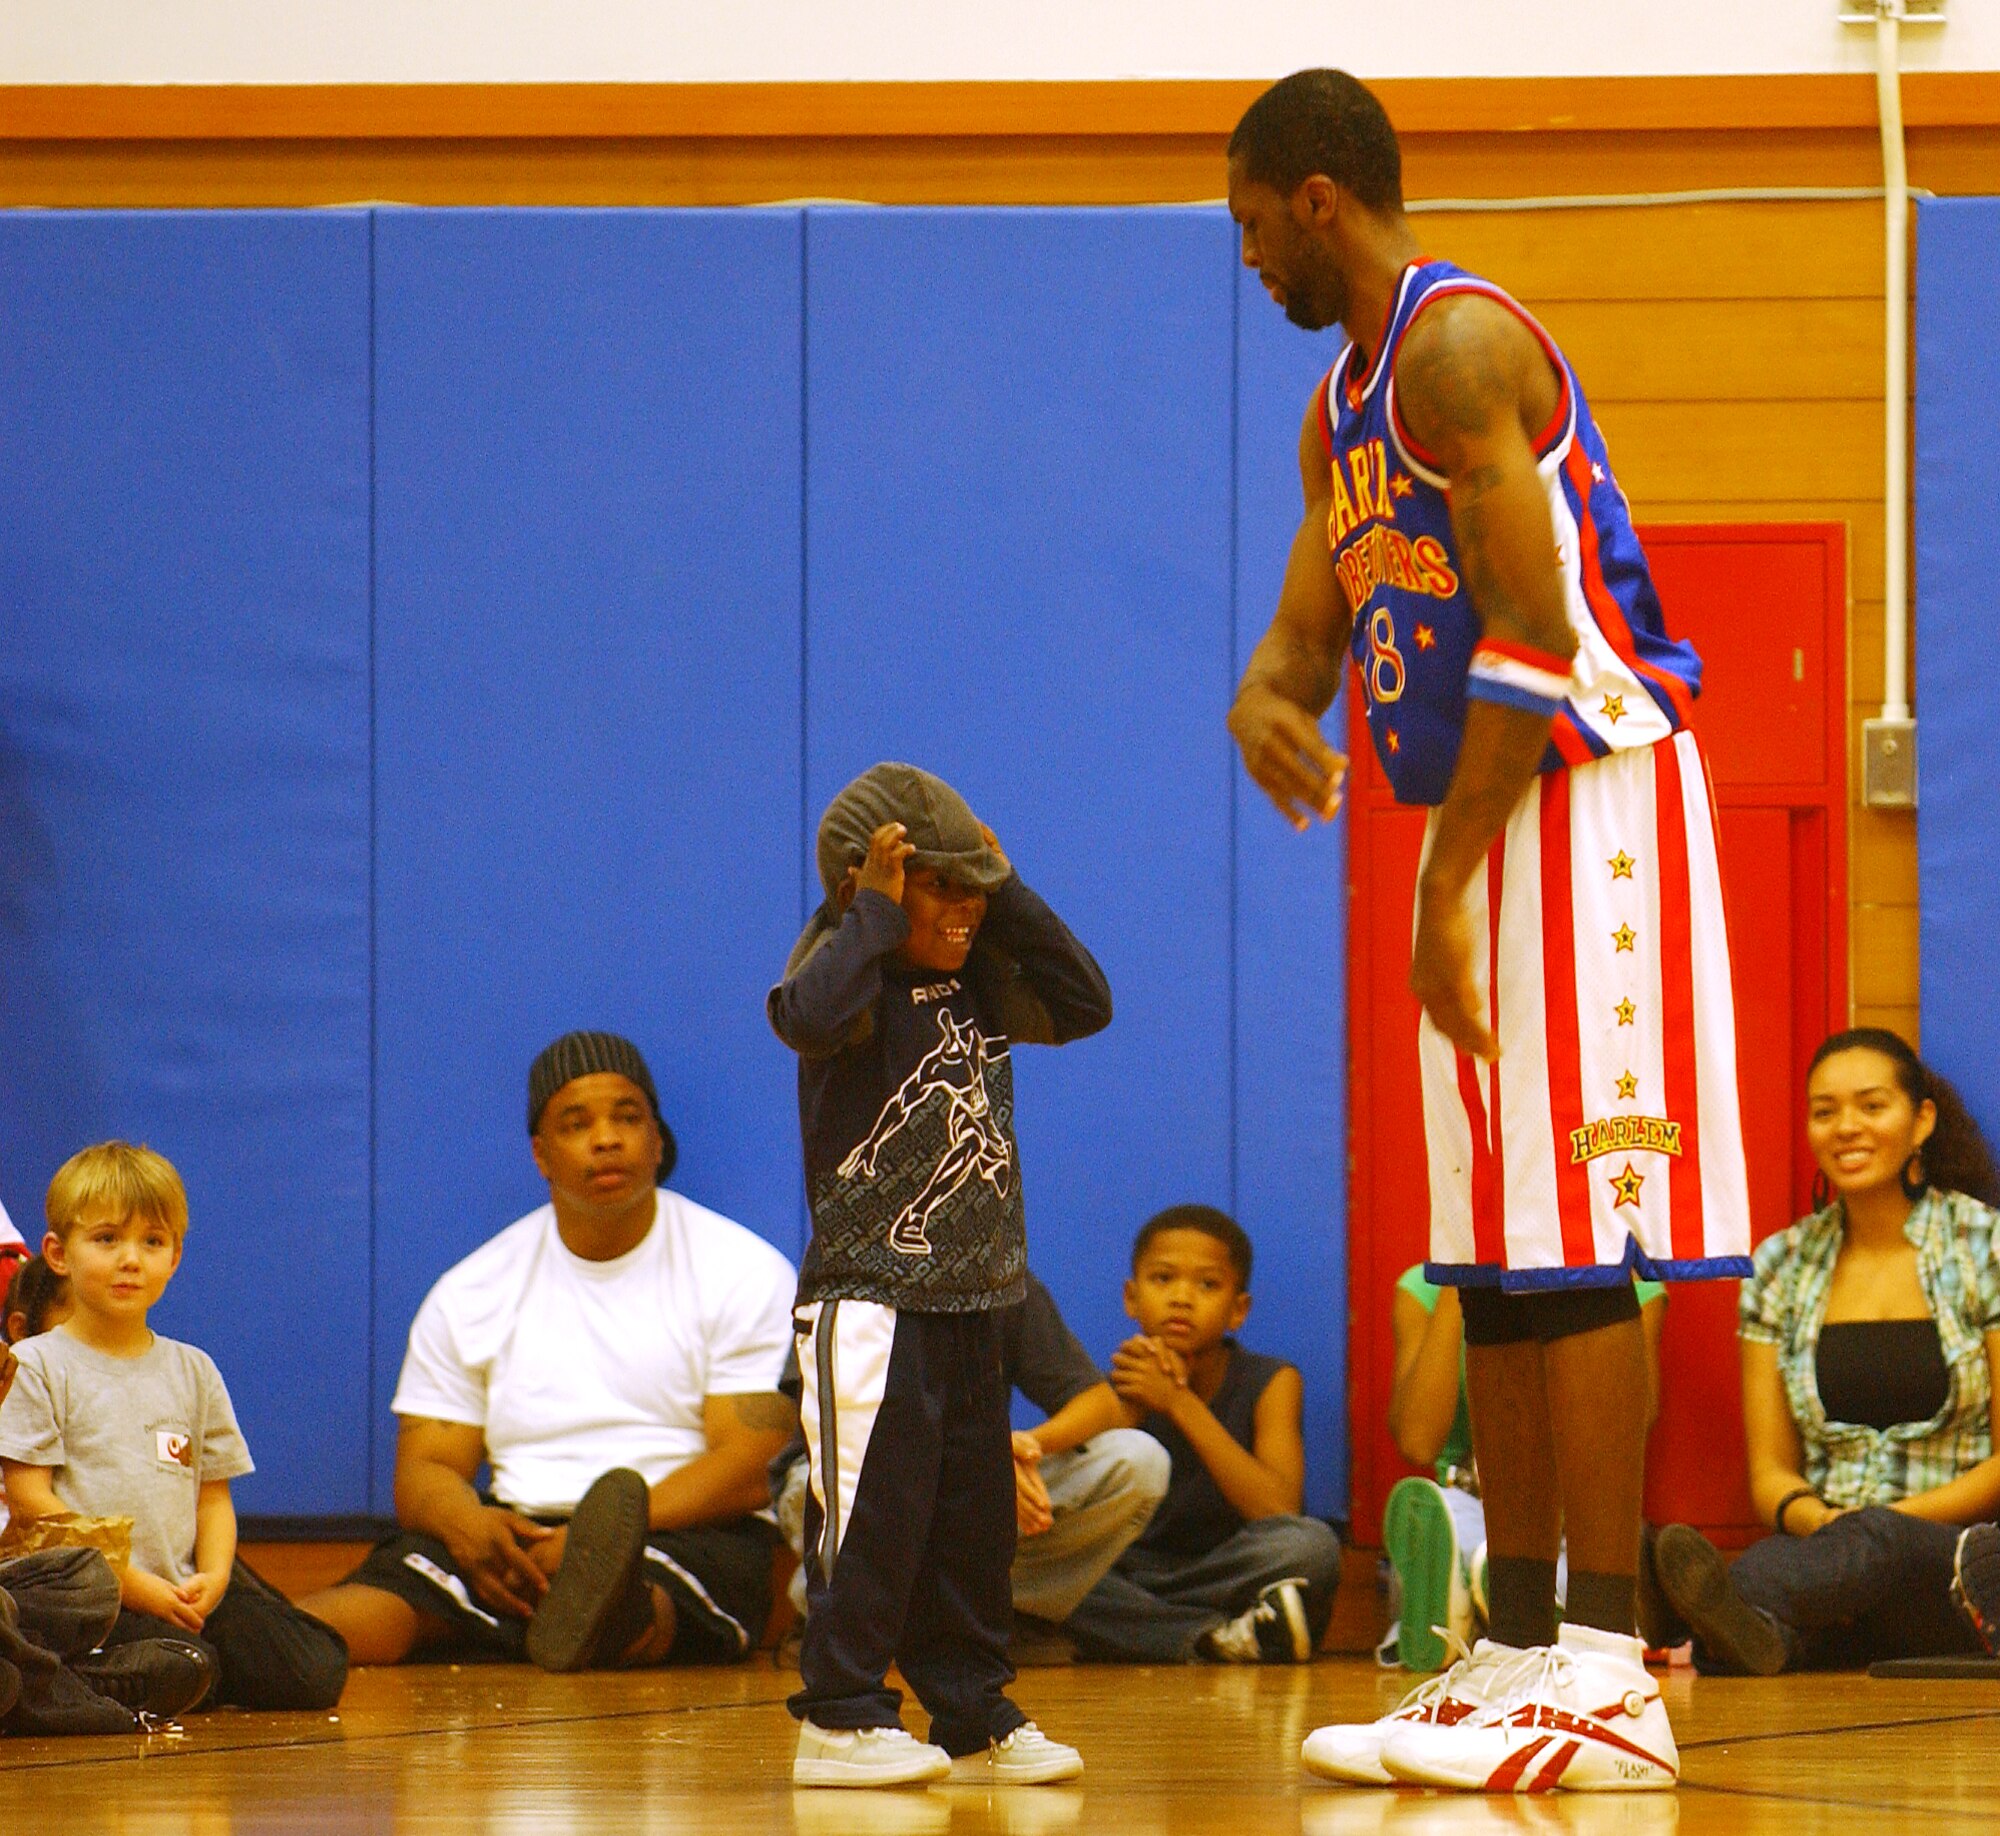 Hi Rise Brown, a Harlem Globetrotter, takes time out from the game to interact with a young member of the audience Dec. 12 at the Risner Fitness Center here. The Globetrotters team has been entertaining crowds around the world for 82 years.
(U.S. Air Force official photo/Staff Sgt. Nestor Cruz)